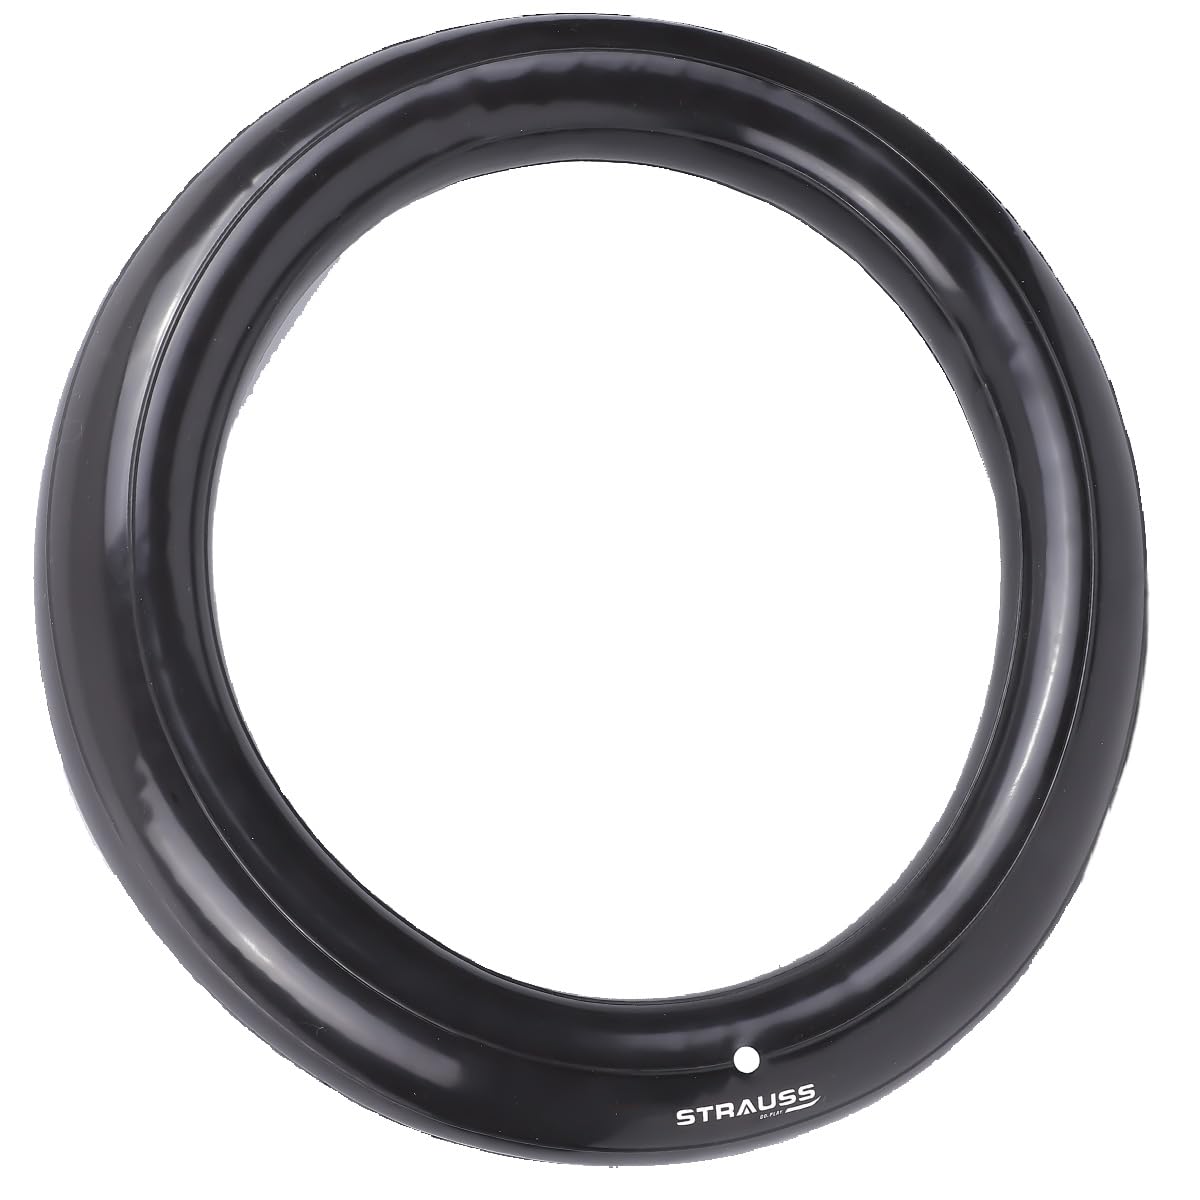 Strauss Gym Ball Base Ring | Round PVC Anti Slip,Thickened & Stable Base| Yoga Ball Fitness Balance Base | Suitable for Home,Gym & Office,(Black)